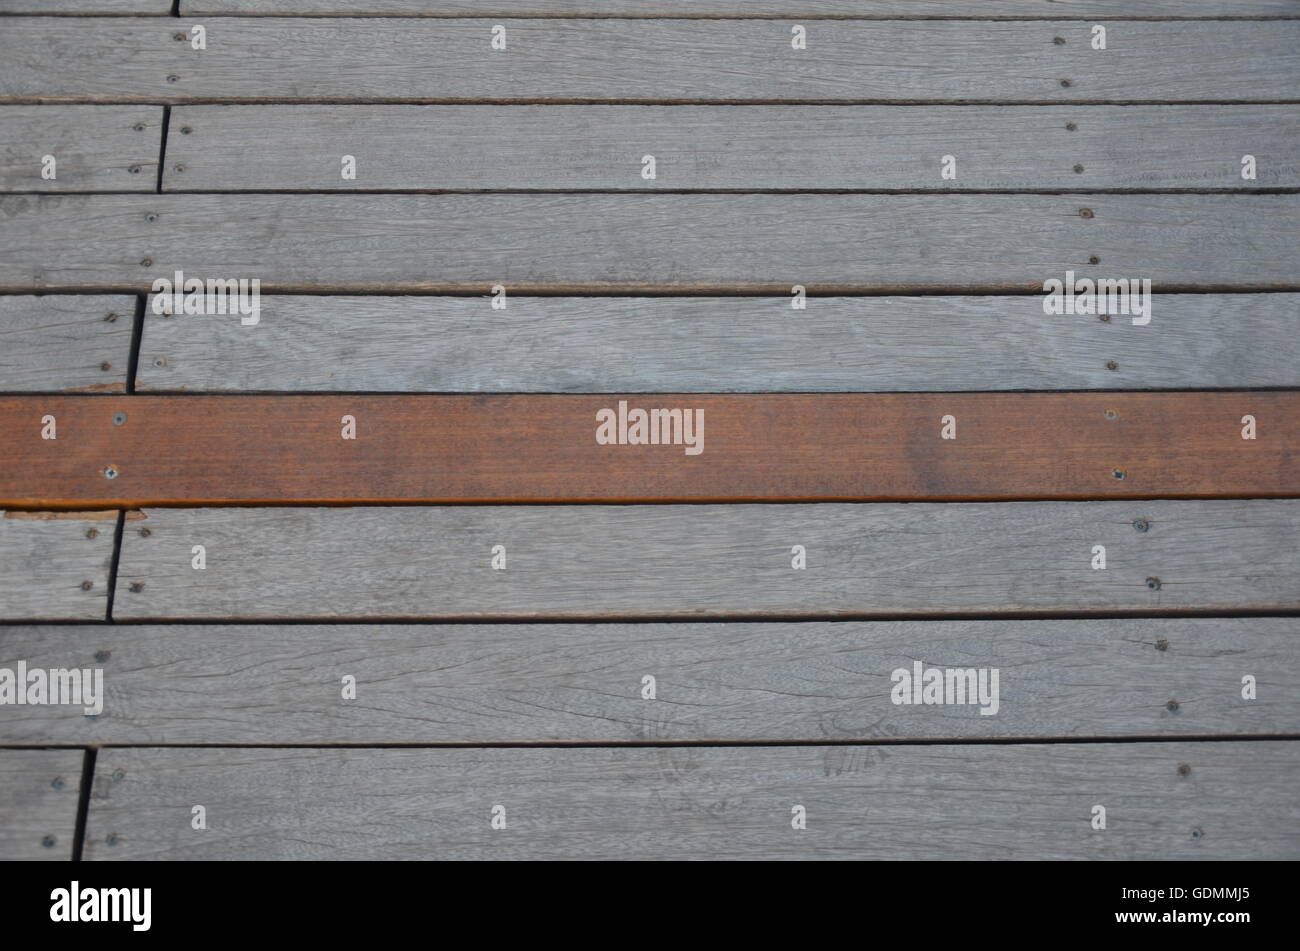 Two colored, wood planks, screw, gray, brown, Wood - Material, Material, Backgrounds, Textured, Table, Rustic, Timber, Nature Stock Photo